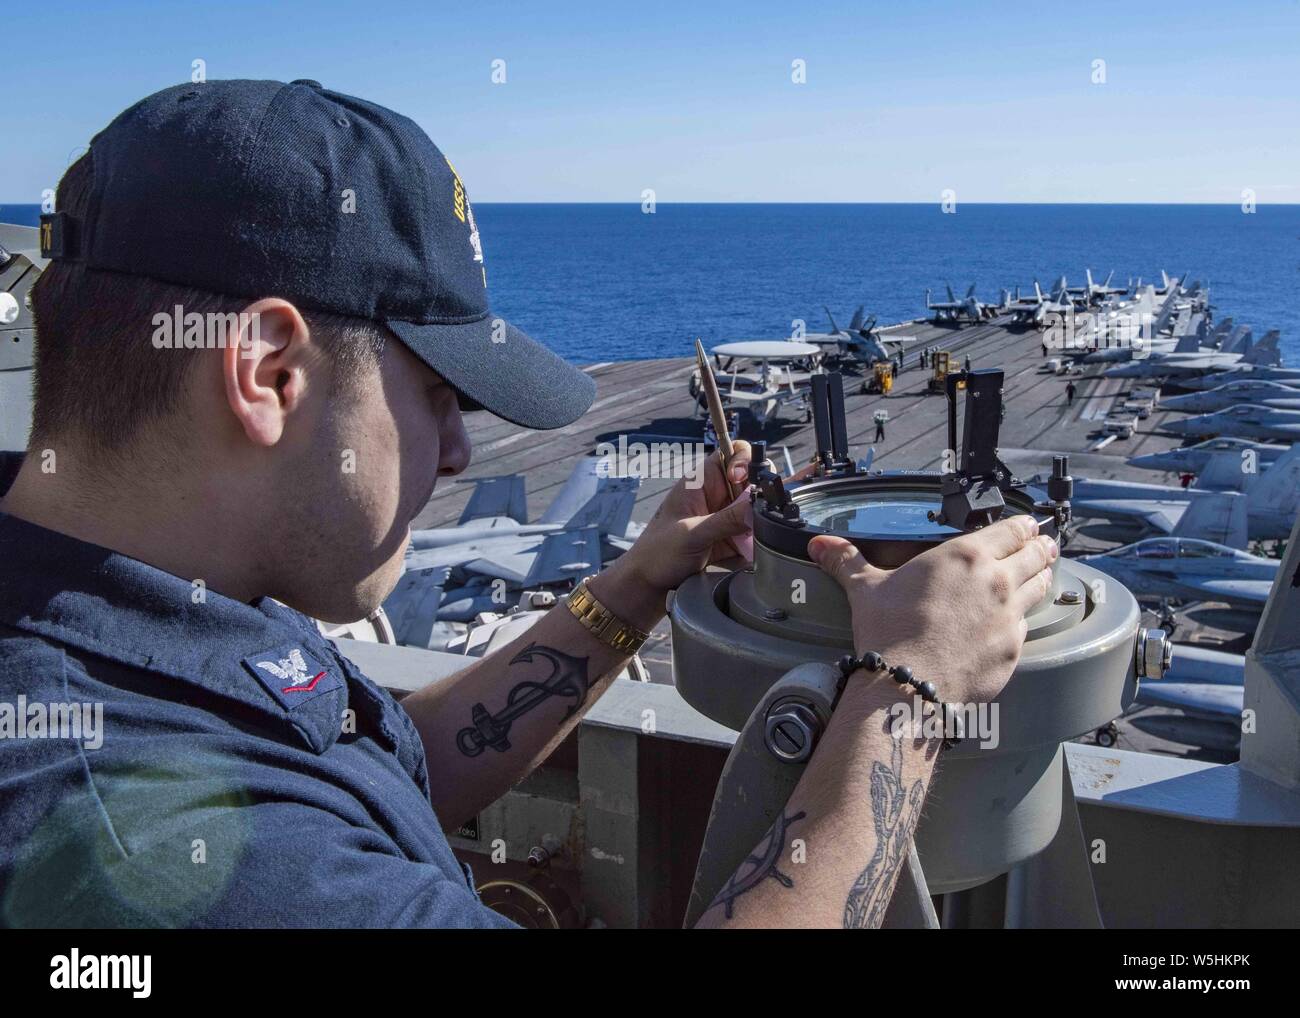 190725-N-DL524-0055 CORAL SEA (July 25, 2019) Quartermaster 3rd Class Payton Sanchez, from Corpus Christi, Texas, obtains the sun's azimuth at the forward lookout station aboard the Navy's forward-deployed aircraft carrier USS Ronald Reagan (CVN 76), July 25, 2019. Ronald Reagan, the flagship of Carrier Strike Group 5, provides a combat-ready force that protects and defends the collective maritime interests of its allies and partners in the Indo-Pacific region. (U.S. Navy photo by Mass Communication Specialist 3rd Class Erica Bechard) Image courtesy Petty Officer 3rd Class Erica Bechard/USS RO Stock Photo